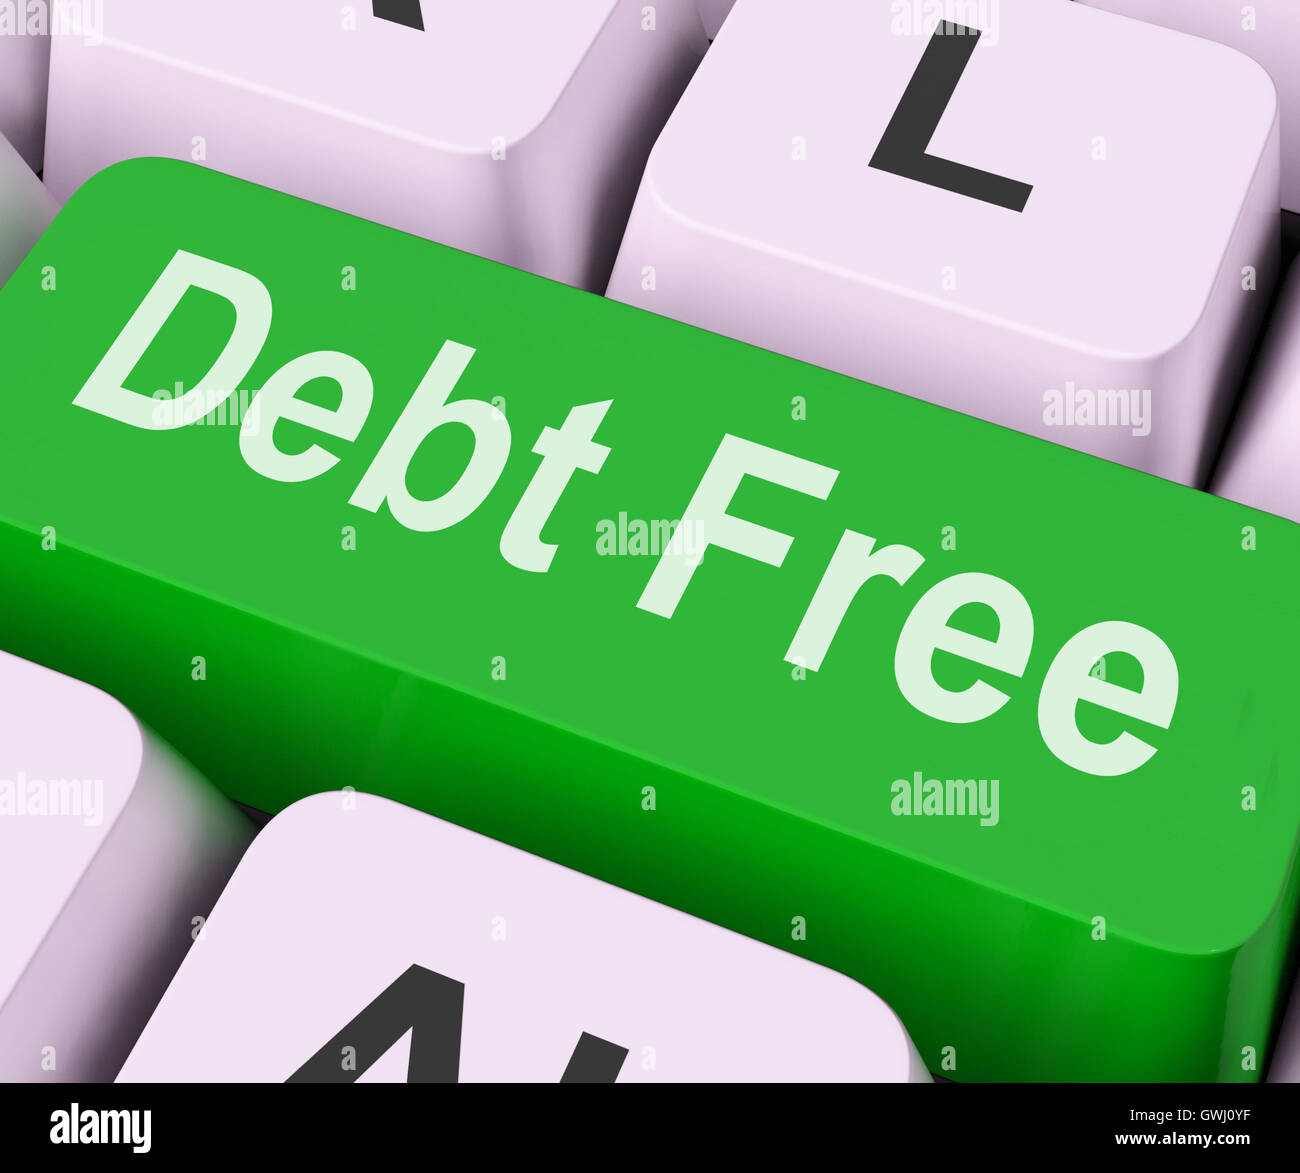 Debt Free Key Means Financial Freedom Stock Photo